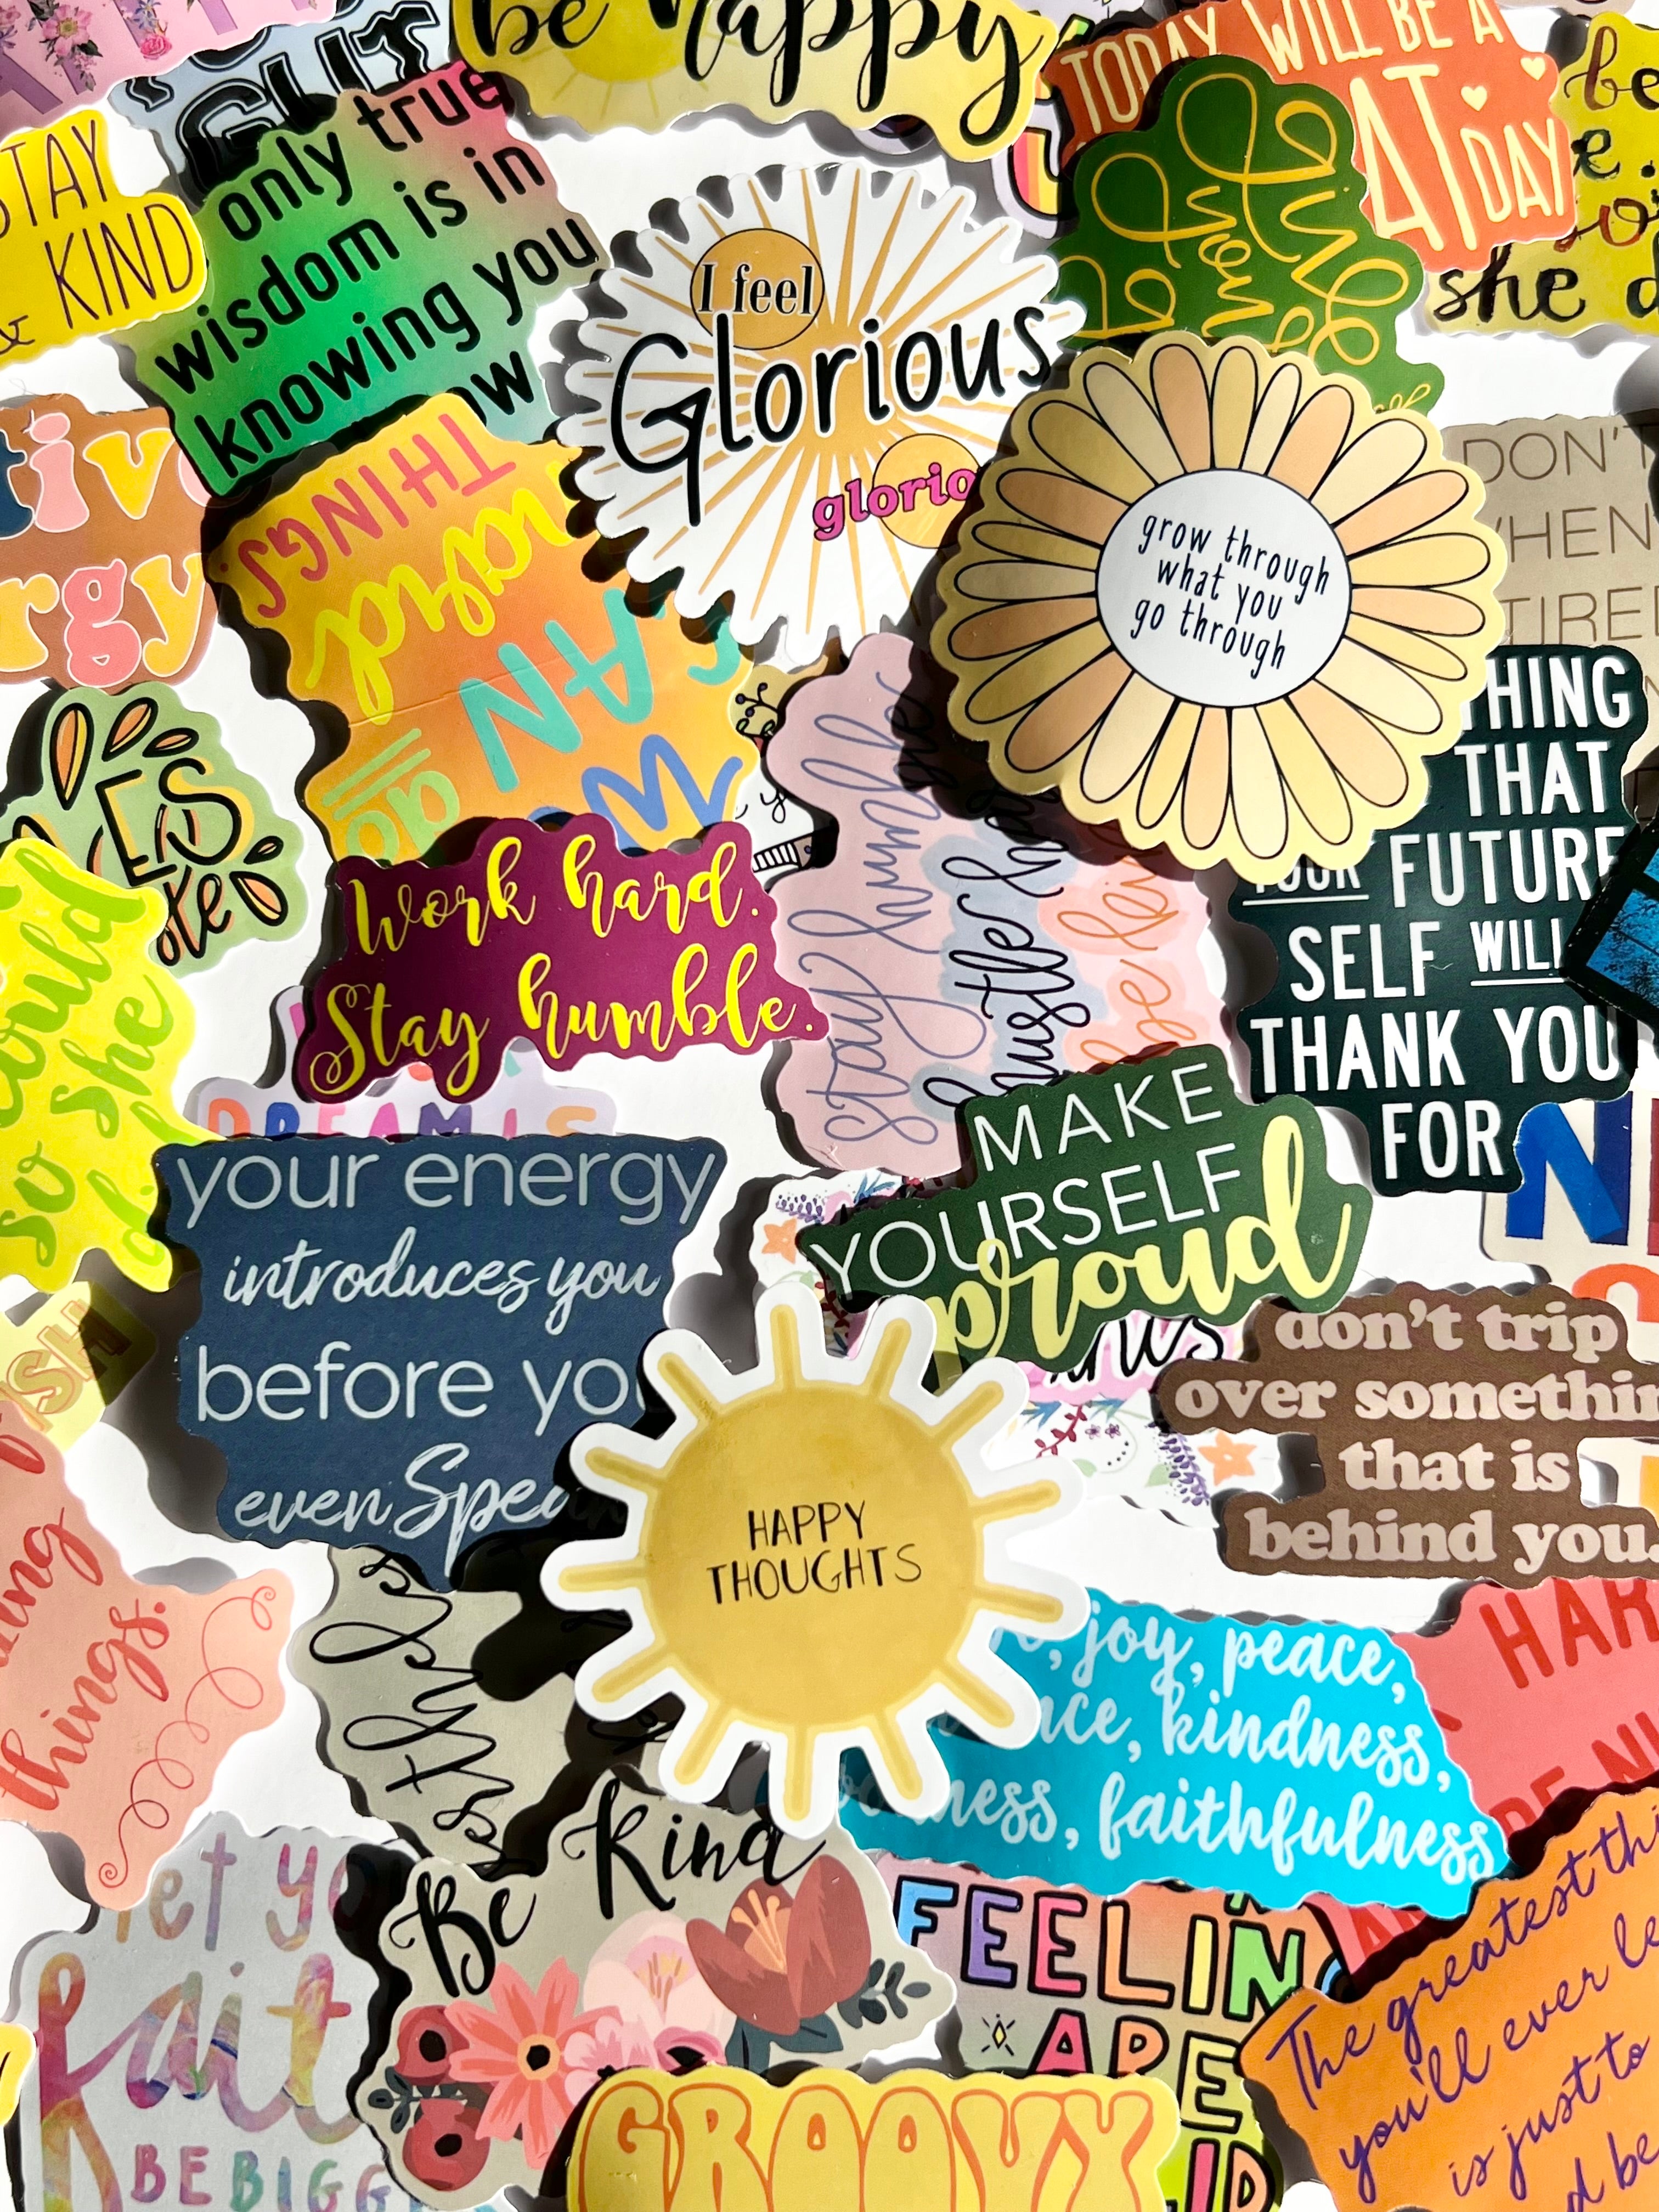 Encouraging stickers, star-shaped - Motivational - Sticker